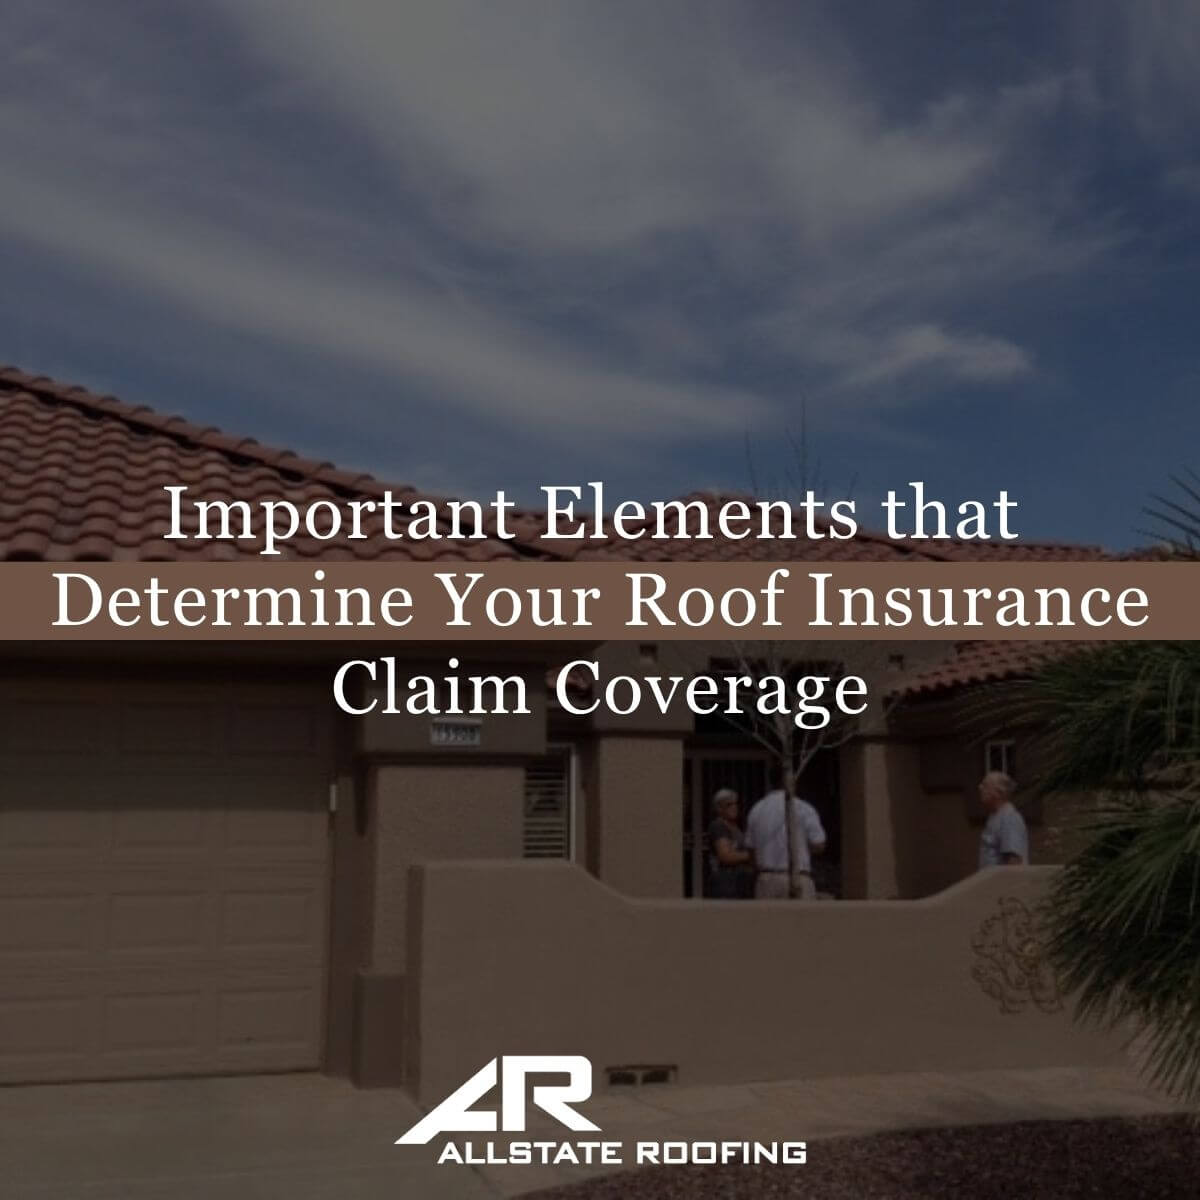 Important Elements that Determine Your Roof Insurance Claim Coverage